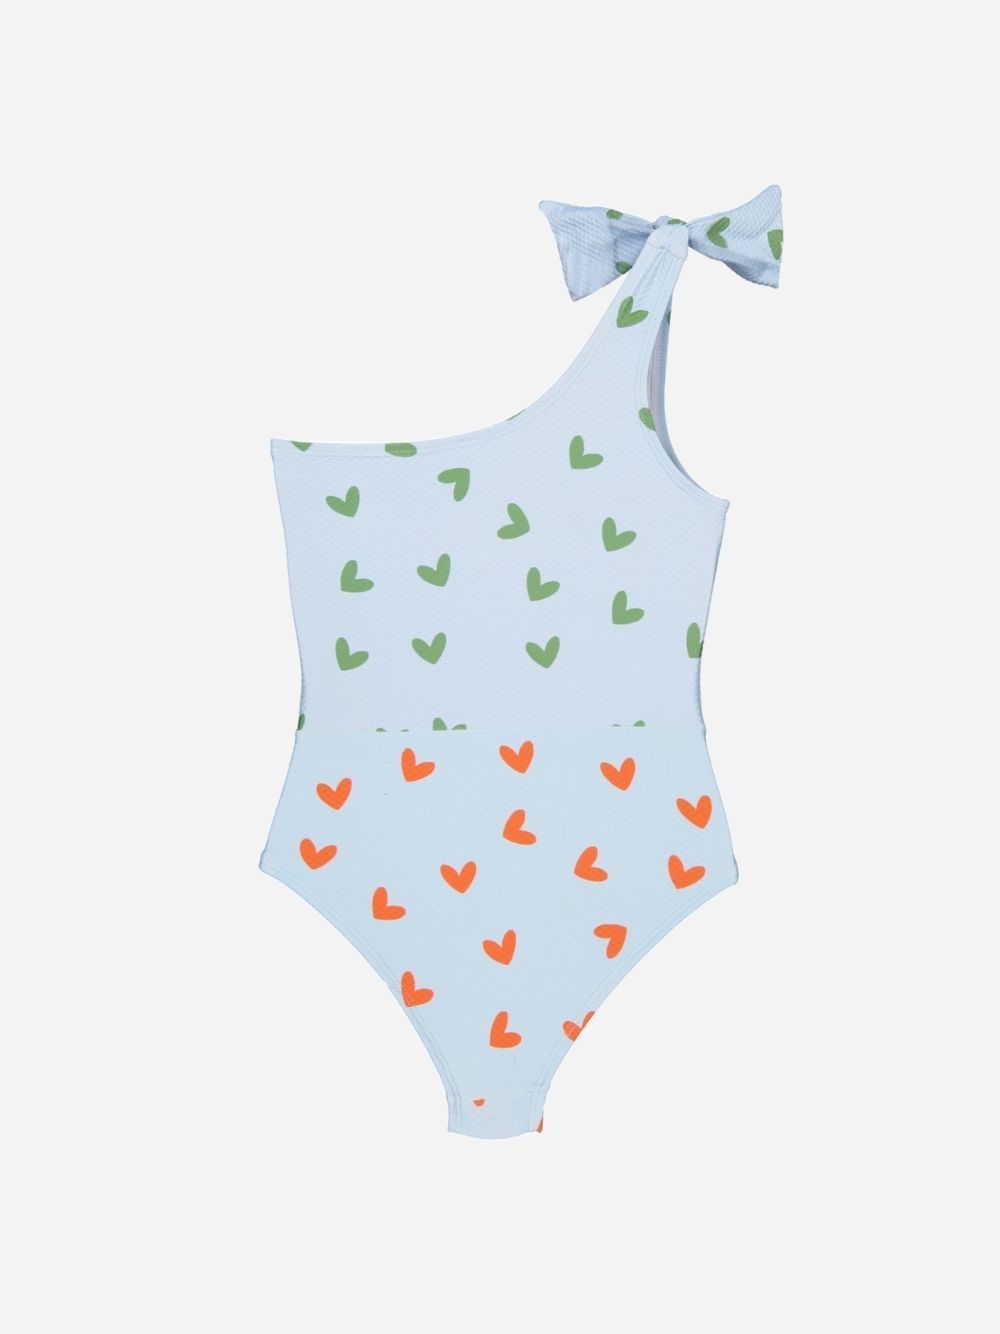 Assymetric textured hearts swimsuit